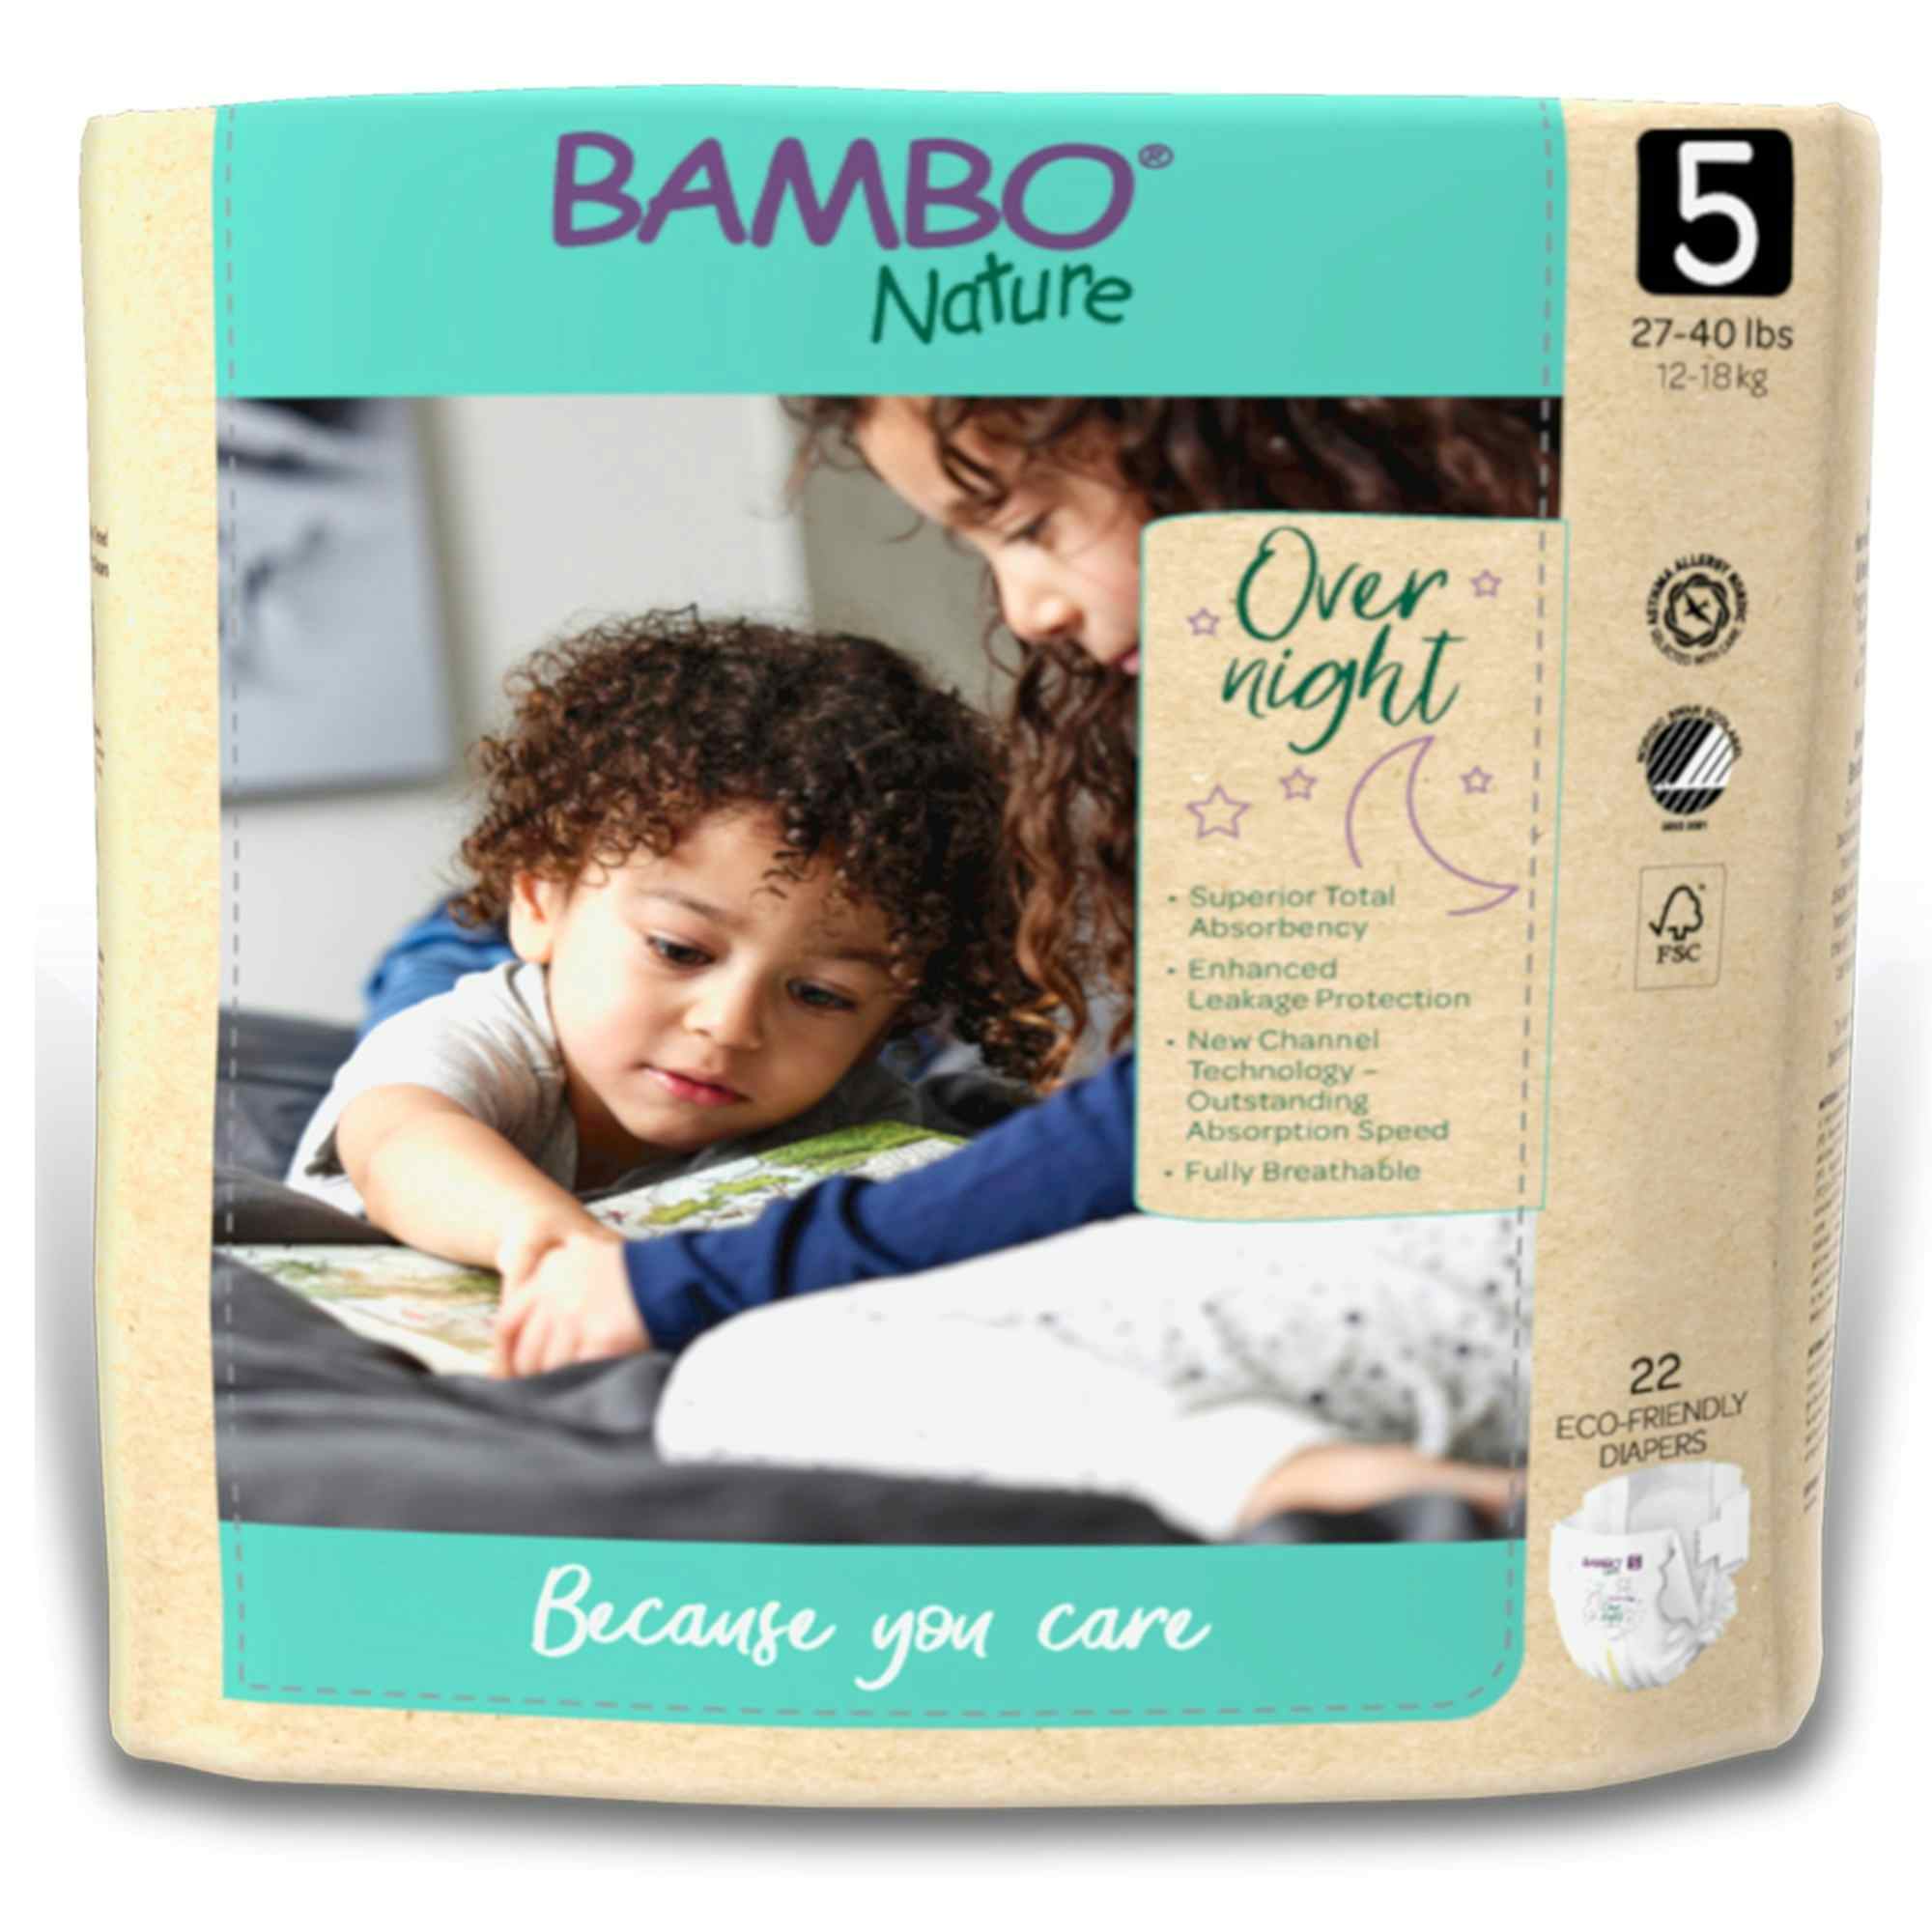 Bambo Nature Overnight Baby Diapers with Tabs, Heavy Absorbency, 1000021011, Size 5 (27 to 40 lbs.) - Case of 88 